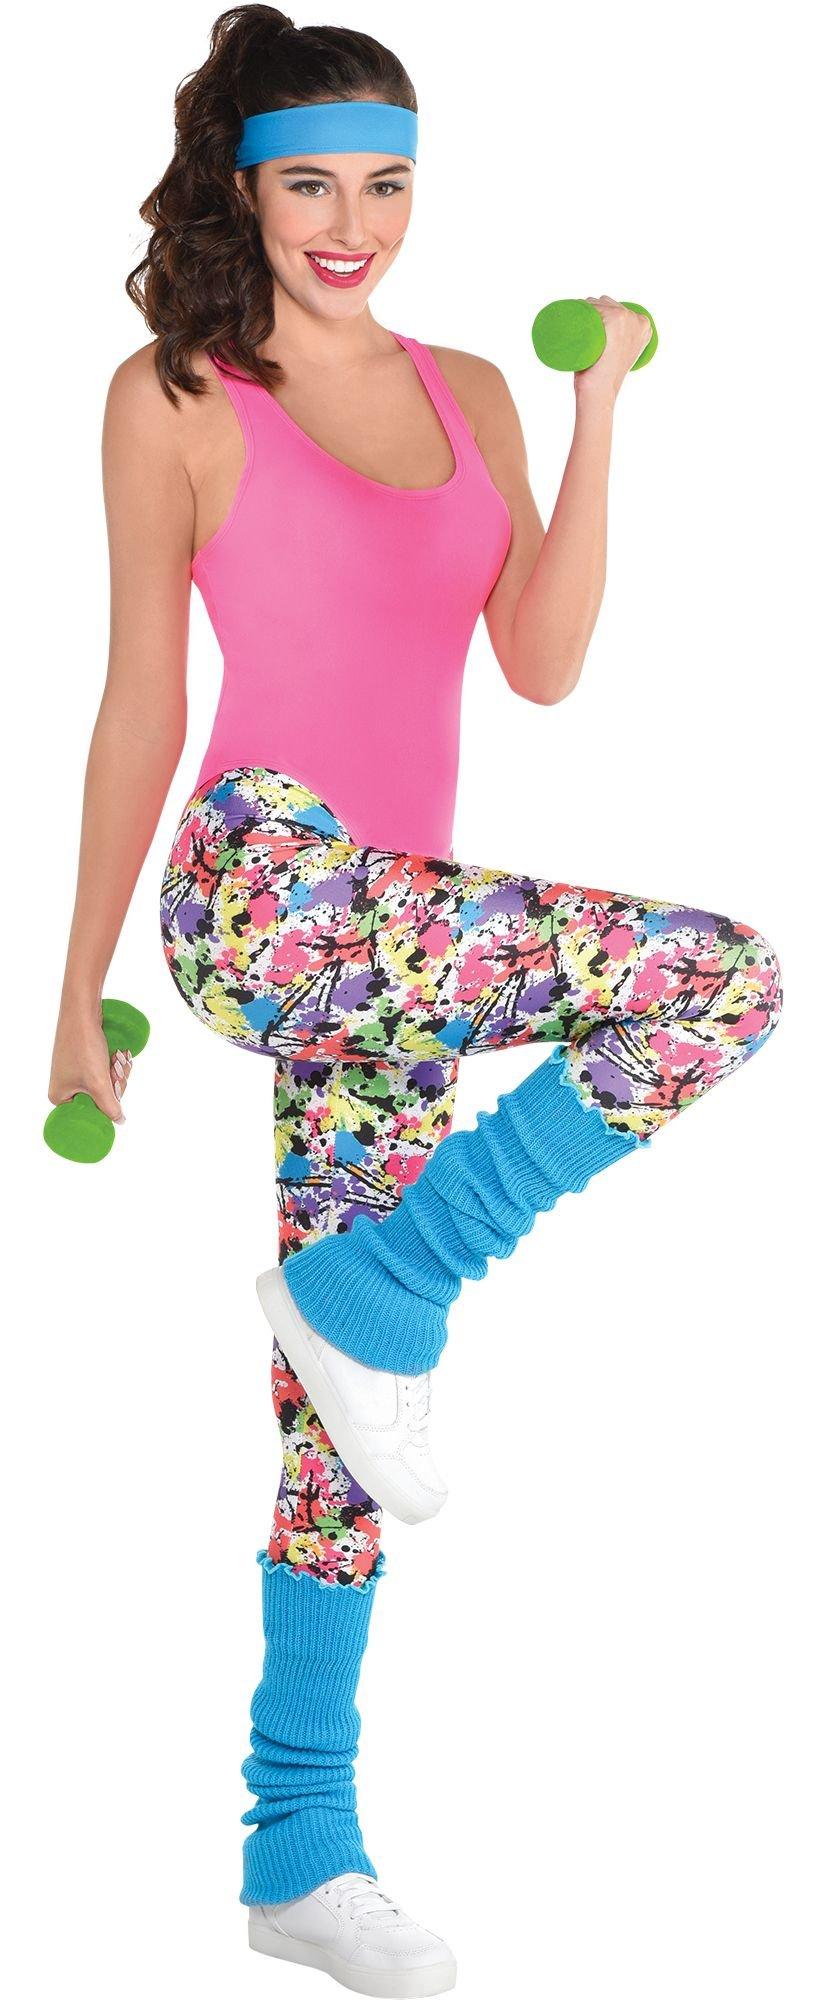 Adult 80s Exercise Costume Accessory Kit | Party City